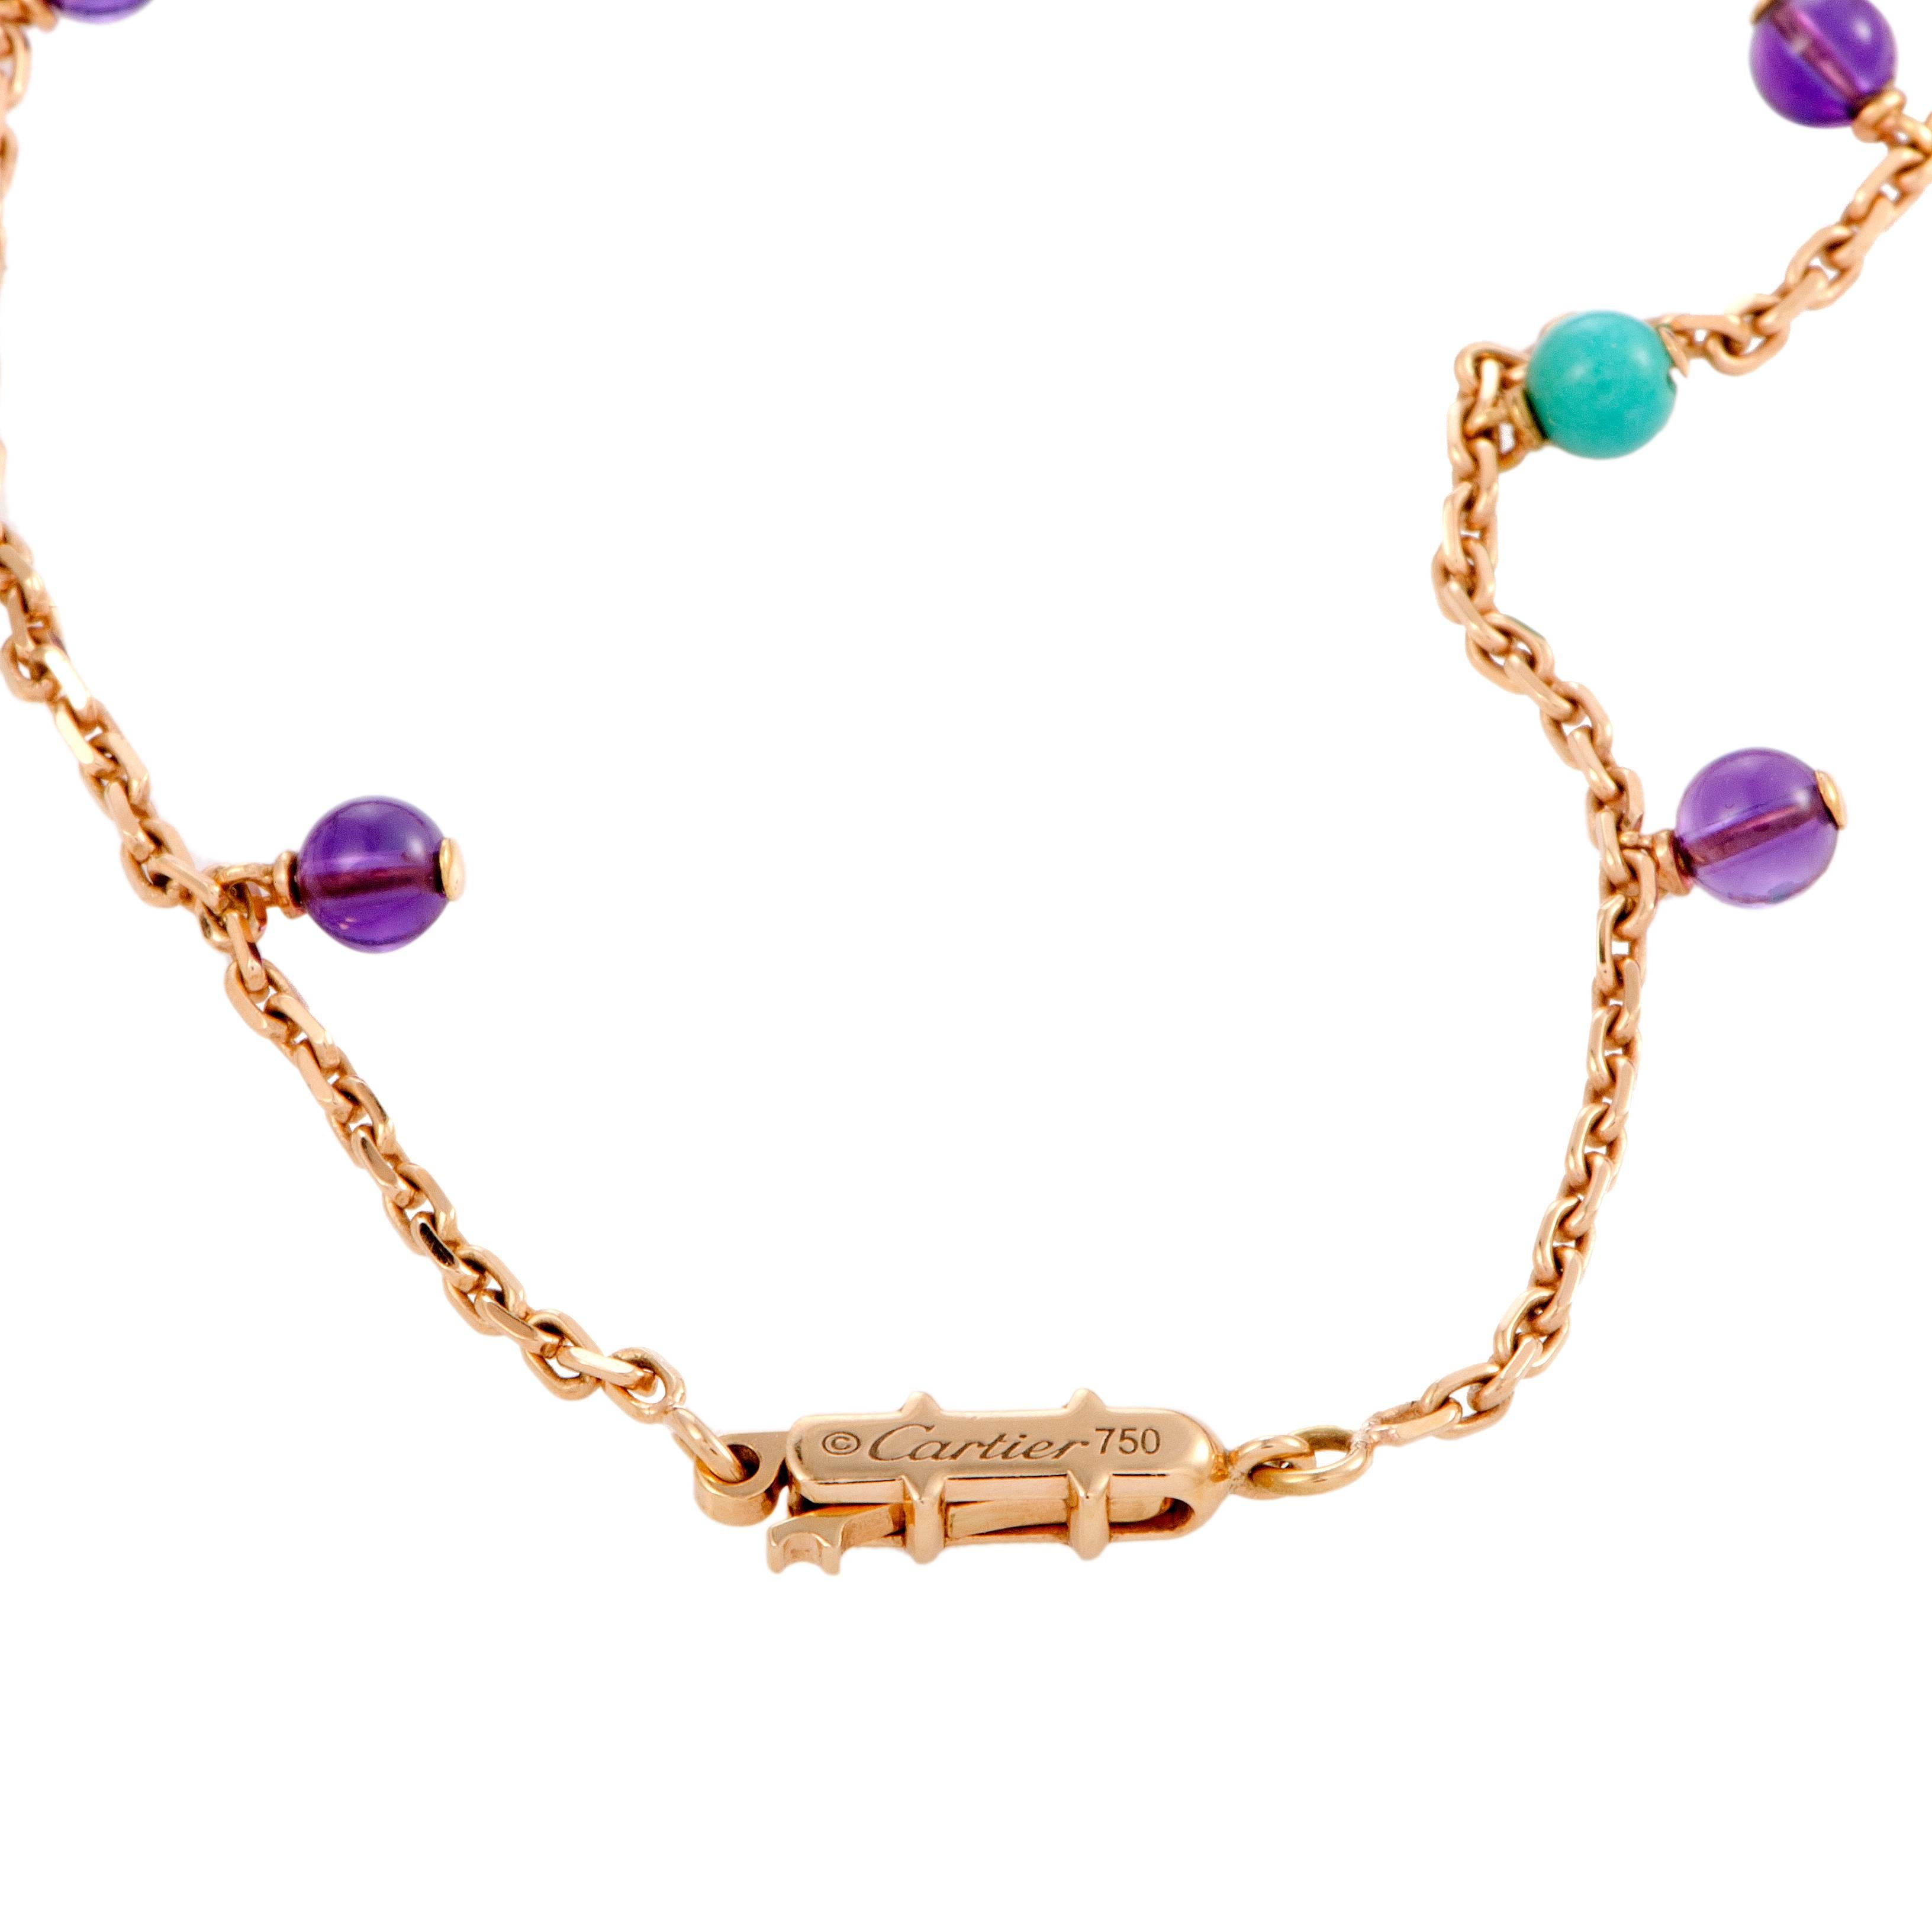 Cartier Delices de Goa Diamond Amethyst and Turquoise Rose Gold Jewelry Set 6